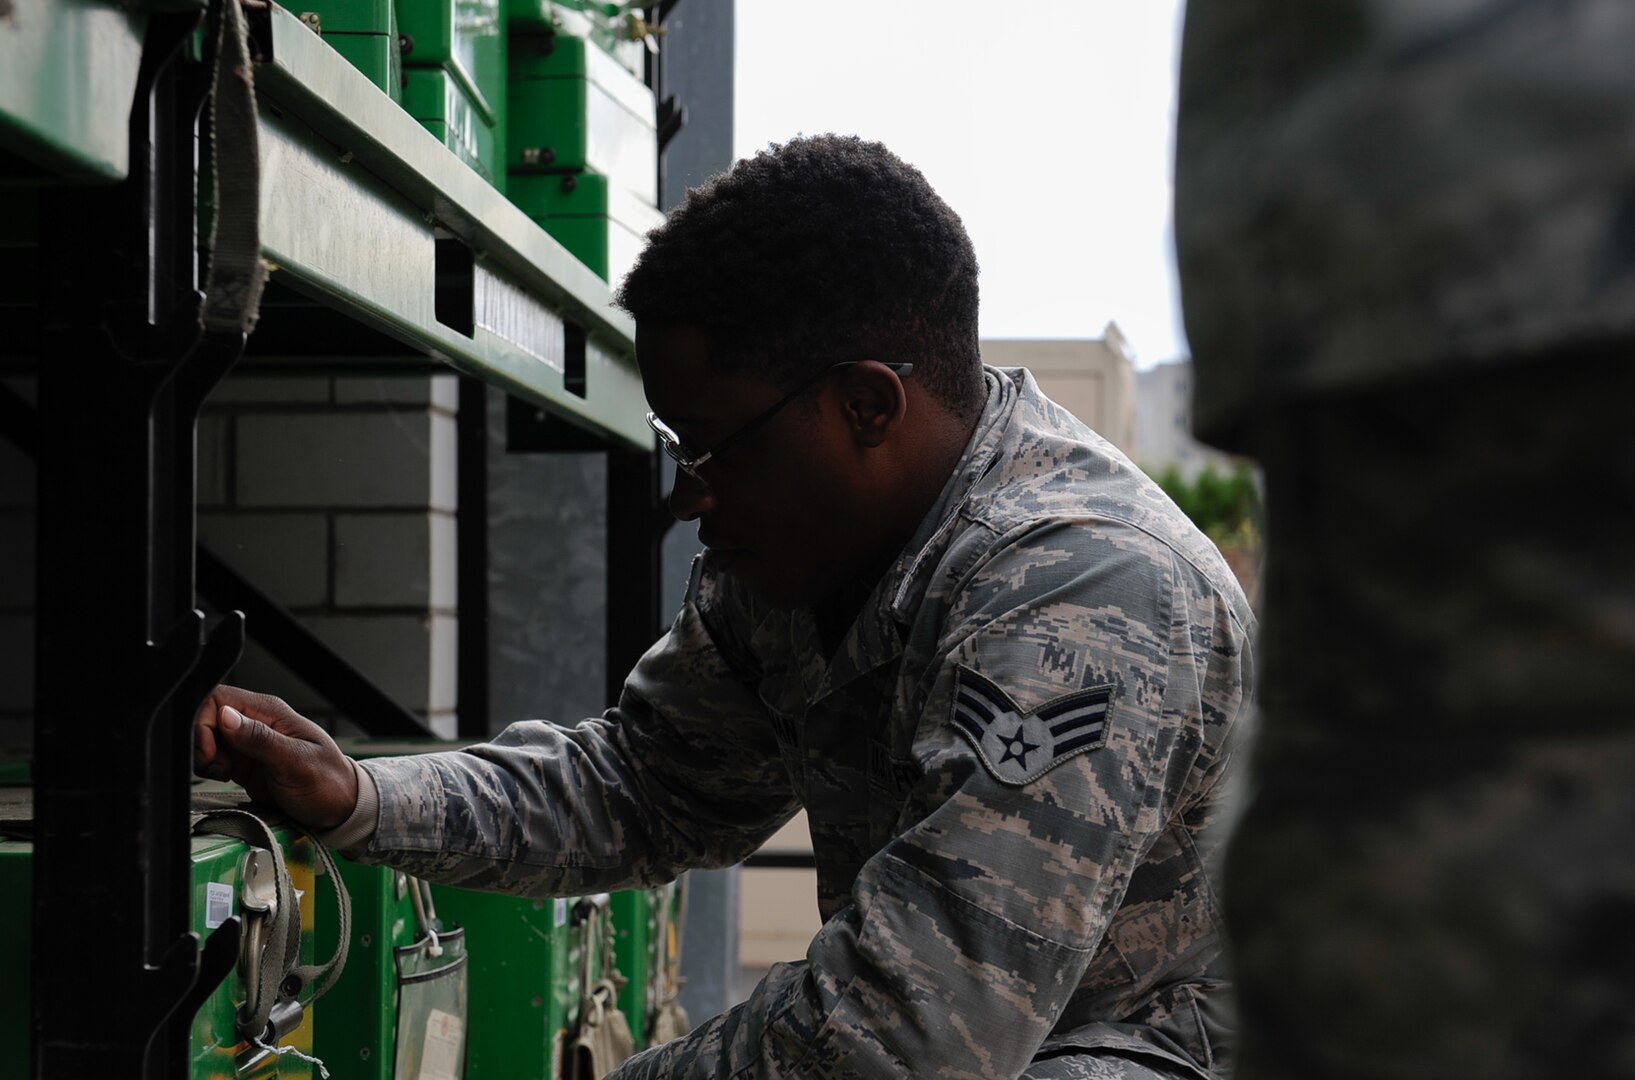 An 86th Medical Support Squadron Airman takes inventory after Exercise Immediate Response 2016 in Slovenia at Ramstein Air Base, Germany, Sept. 28, 2016. Supplies used in exercises like Immediate Response 2016 are inventoried before and after the exercise. (U.S. Air Force photo by Airman 1st Class Savannah L. Waters) 


 



